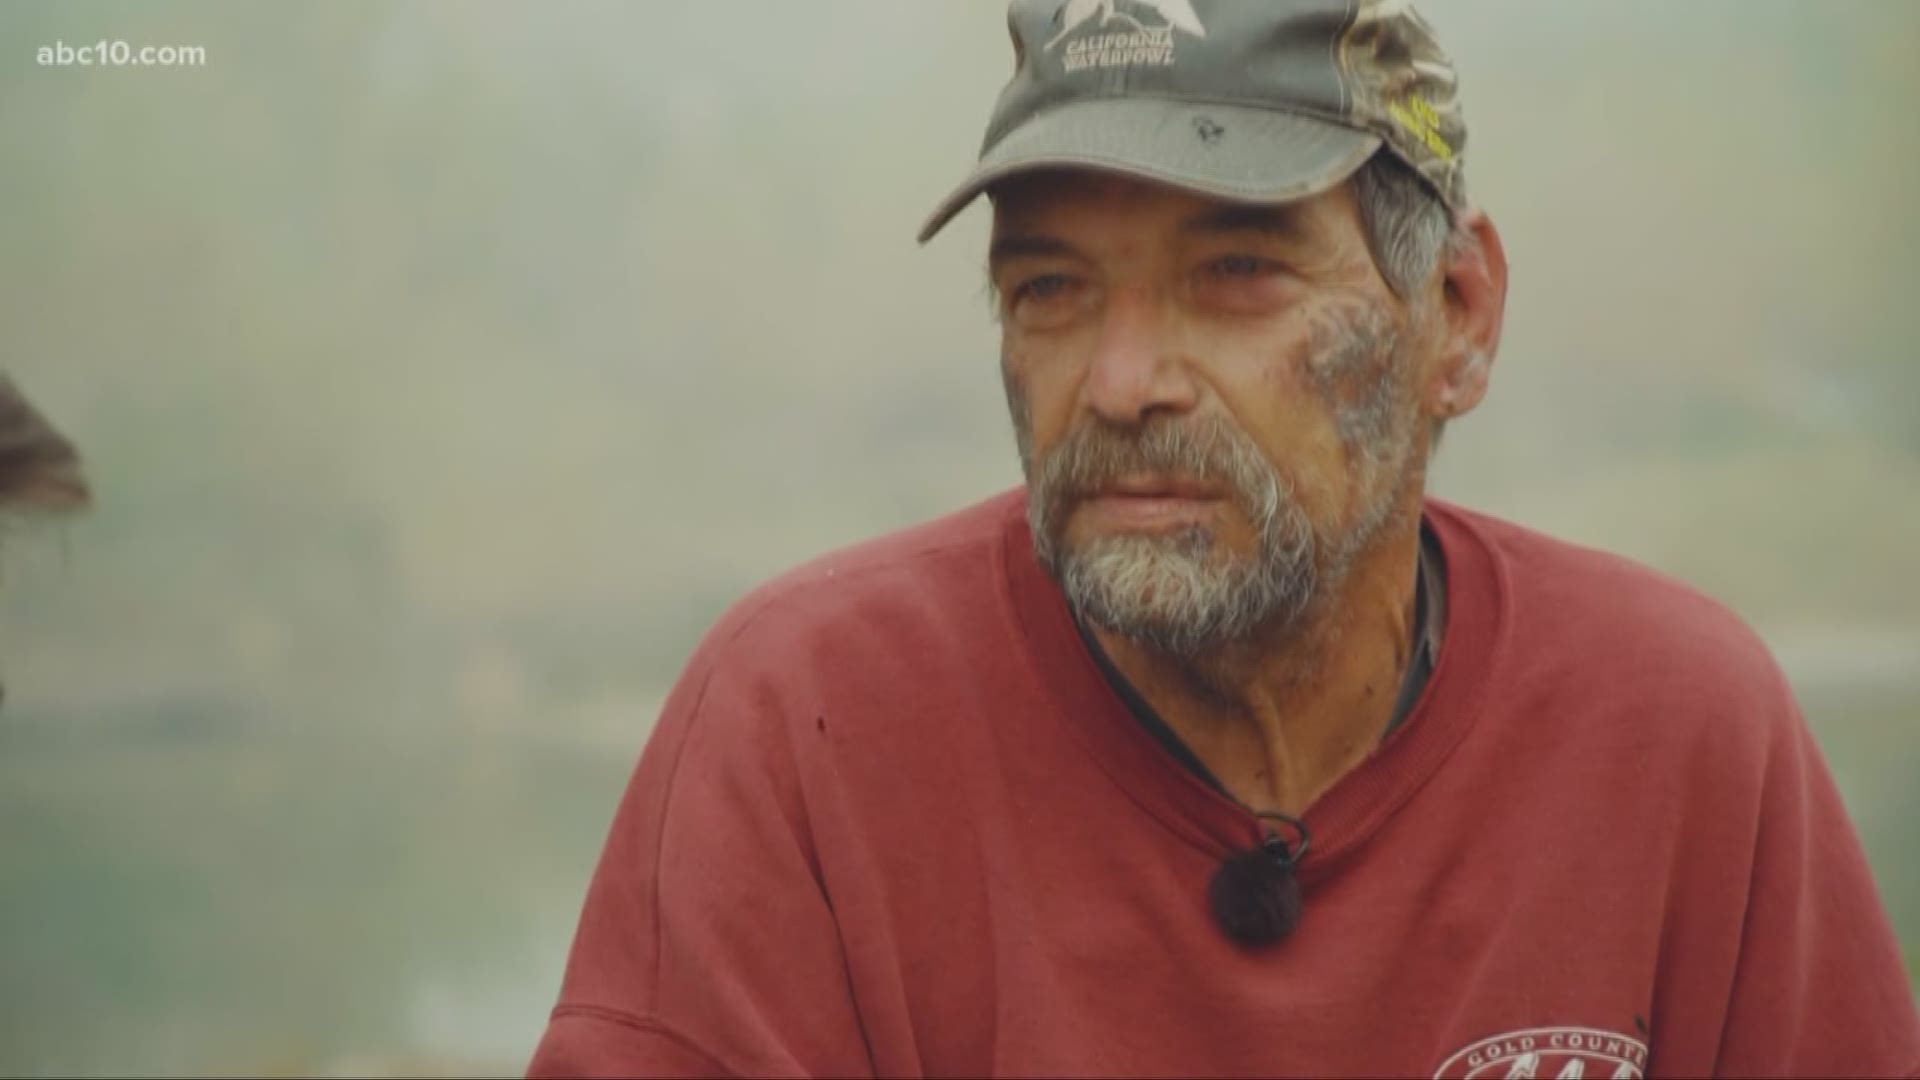 Bill Roth was home with his fiance and dog when the Camp Fire started. After getting them out, he stayed to try saving his house.